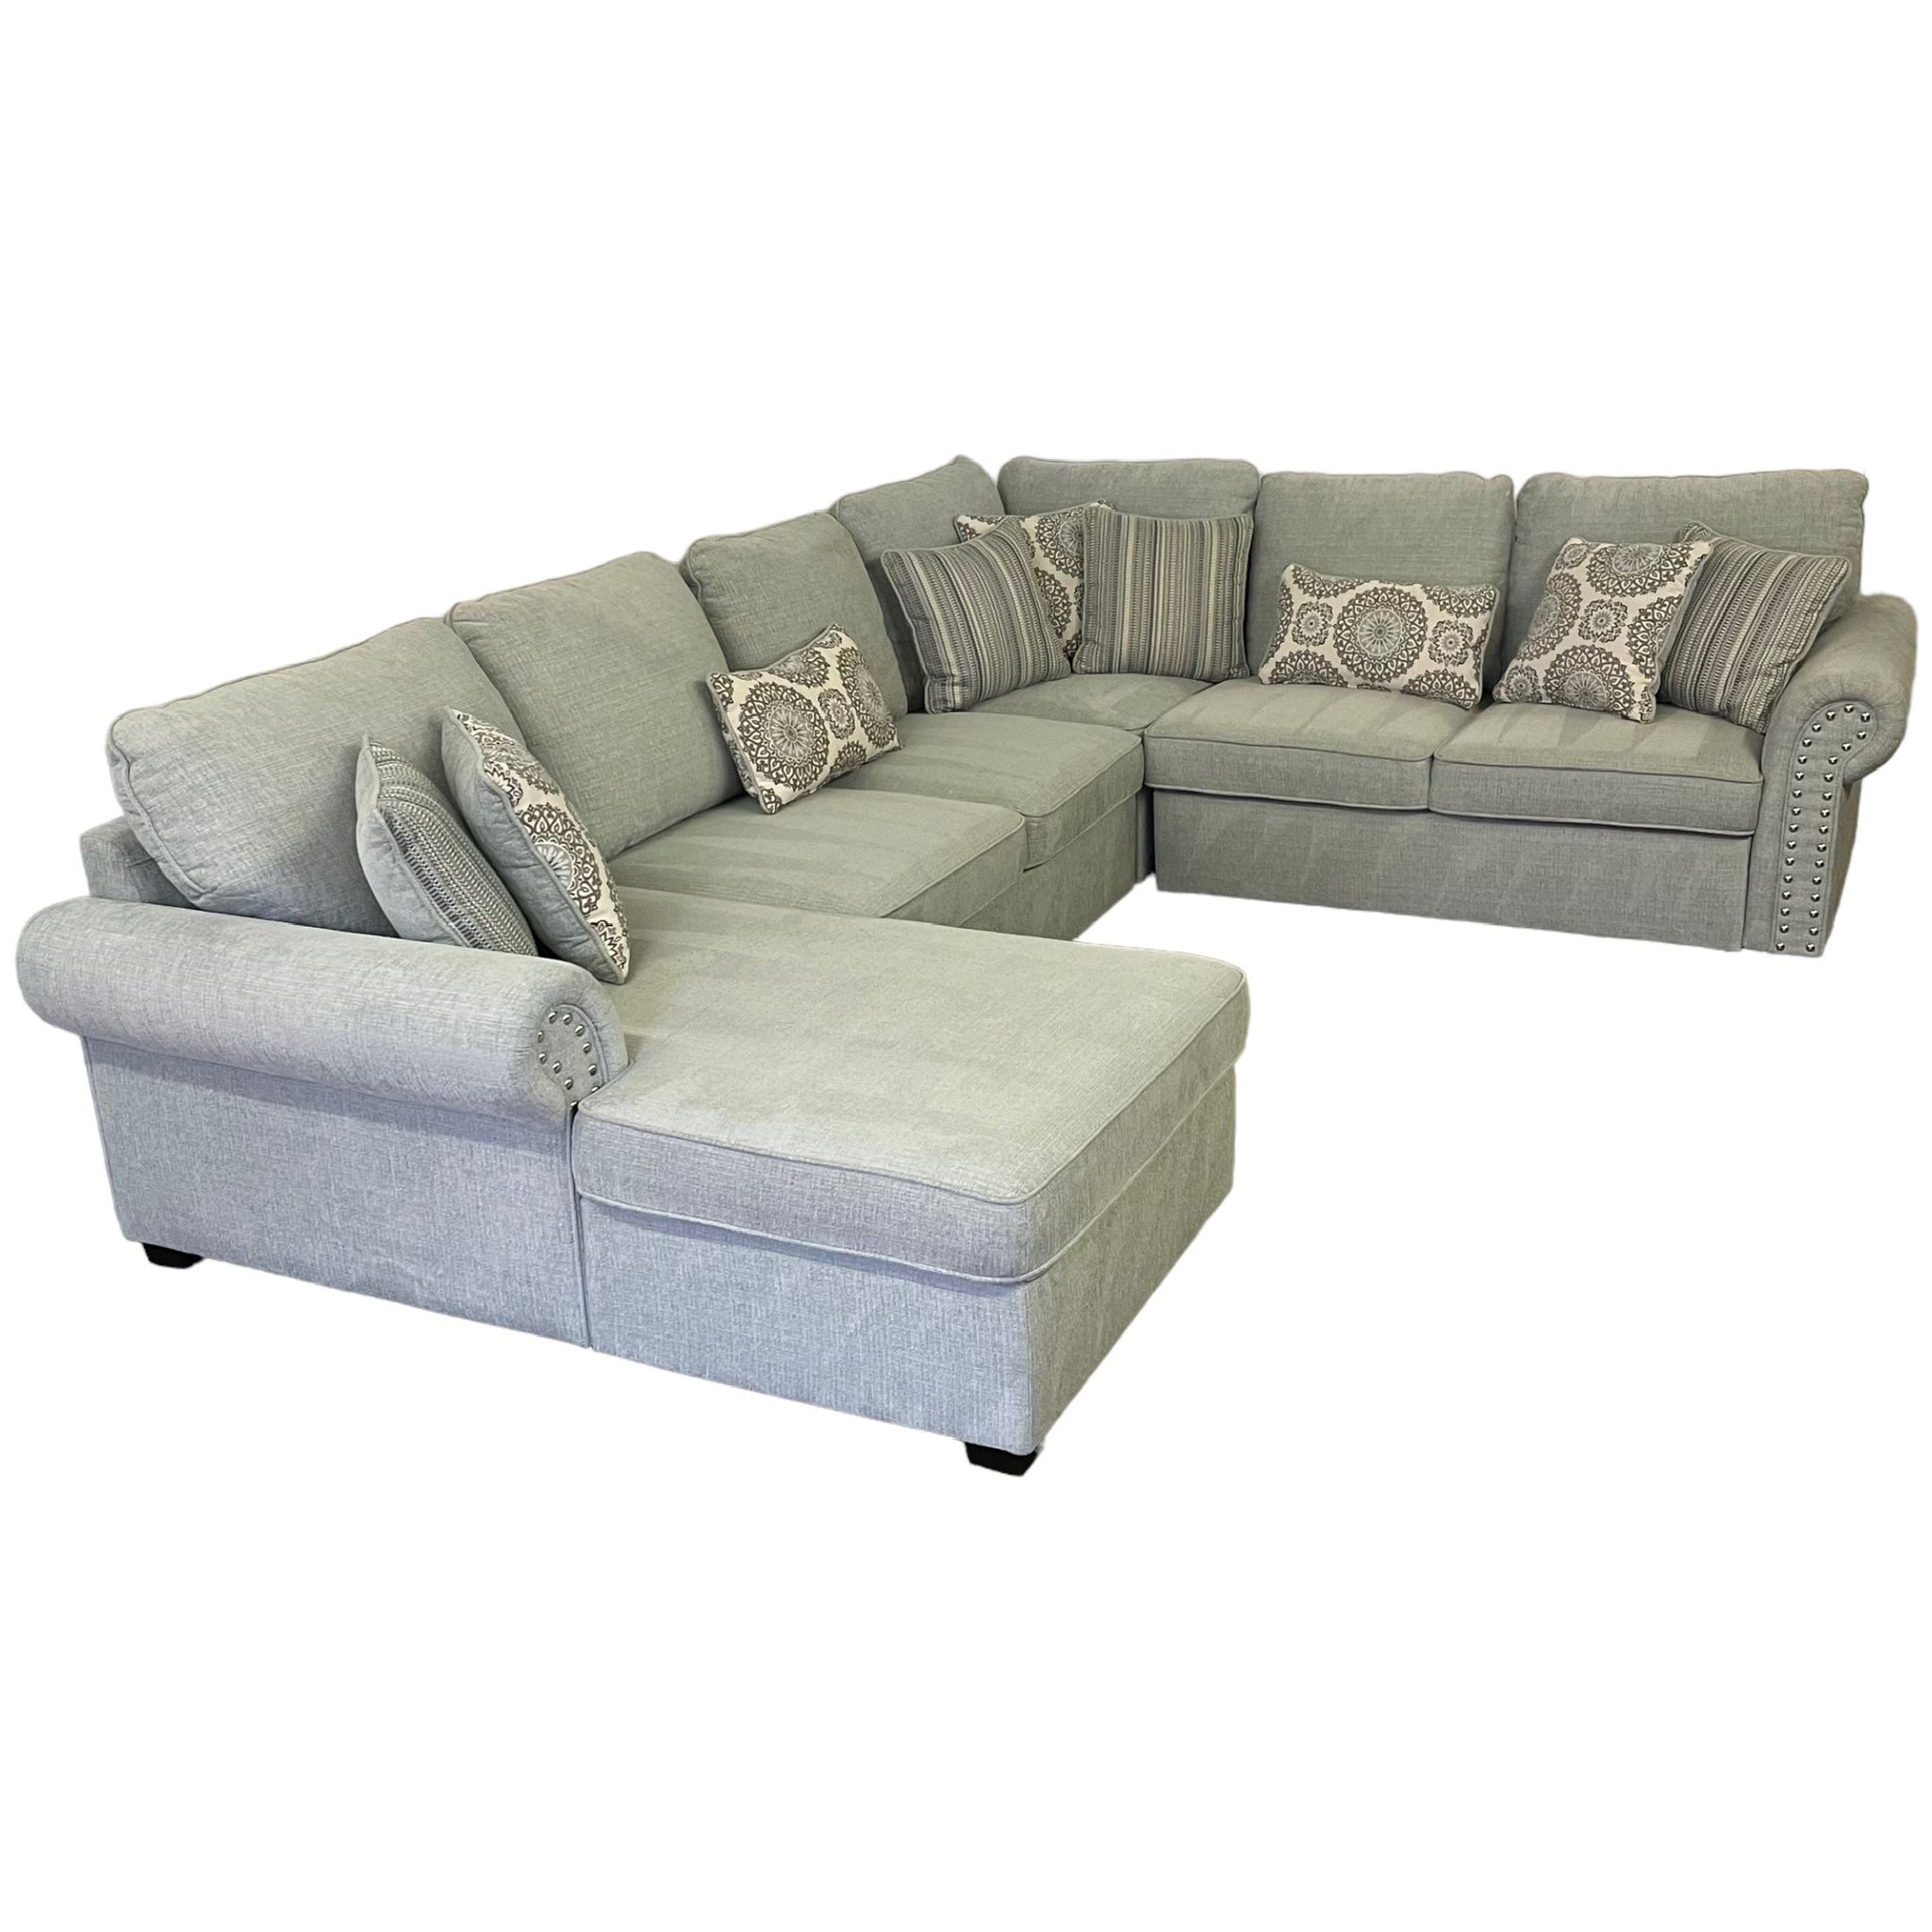 4 Piece Sectional With Delivery 